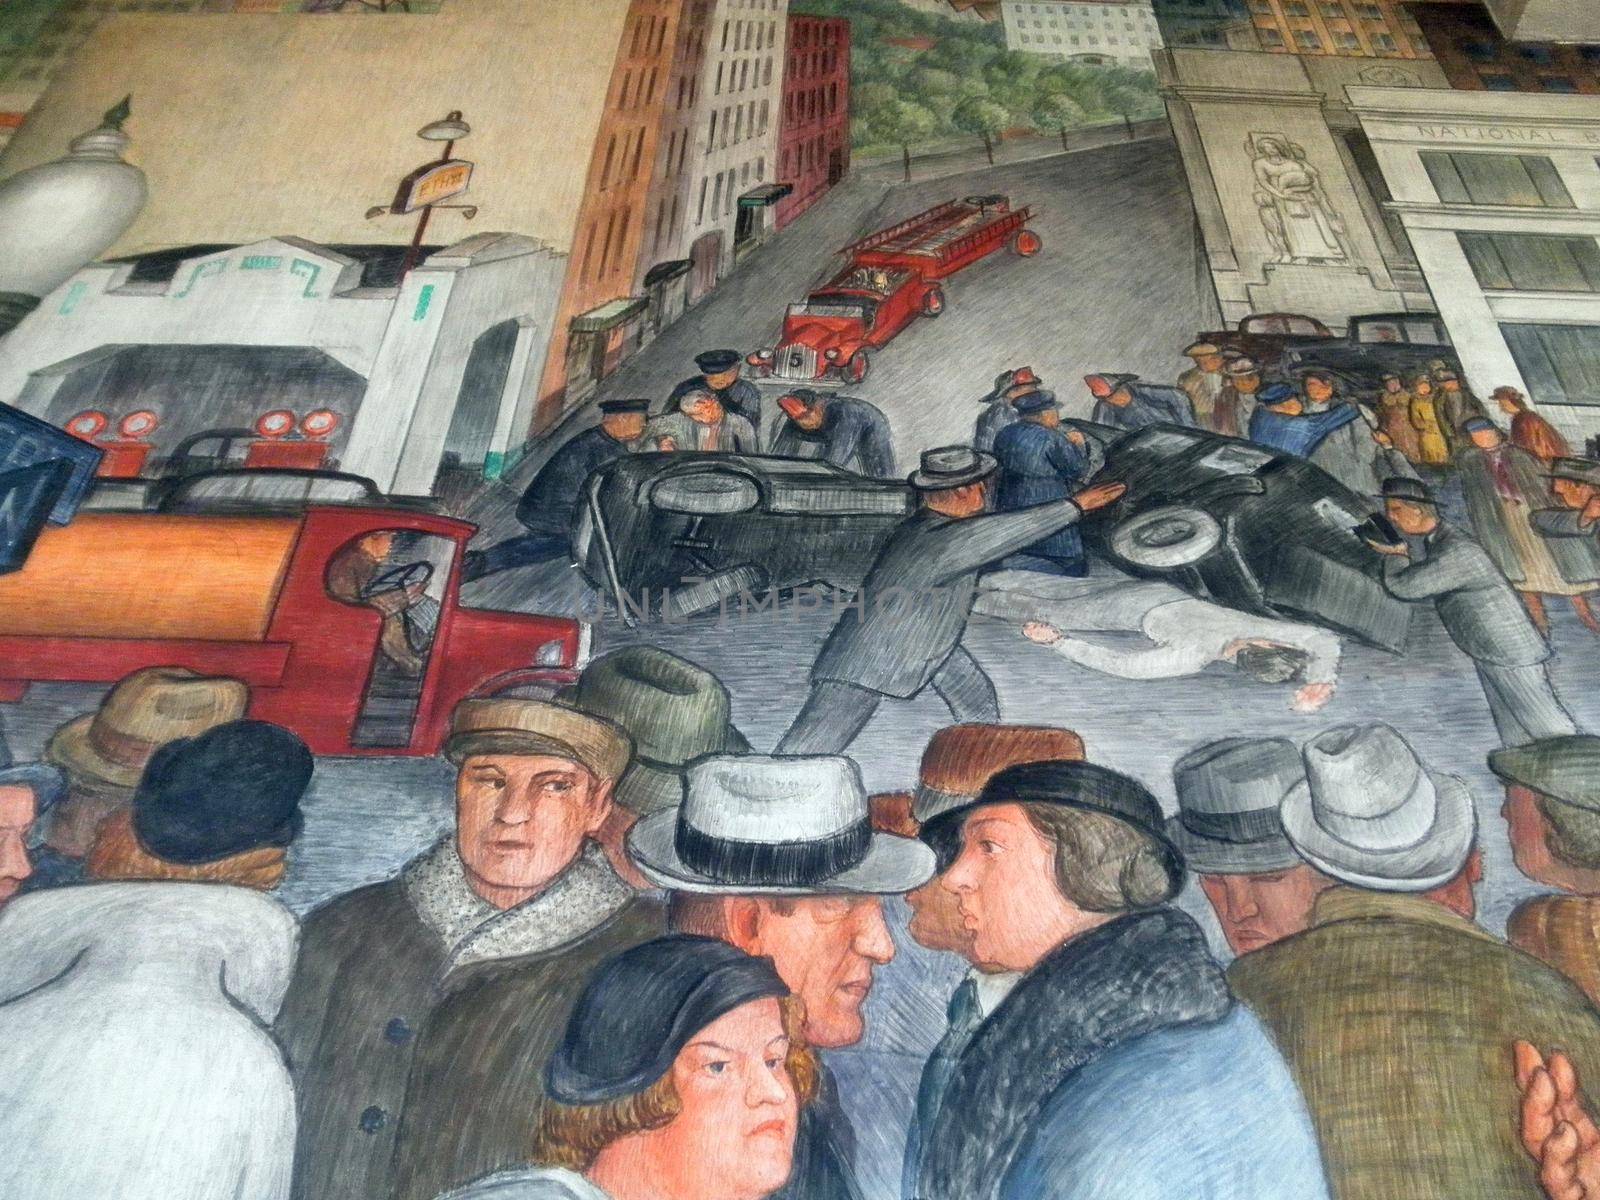 San Francisco - January 20, 2011: Close up of, City Life, one of the largest murals at Coit Tower.   It was painted by Victor Mikhail Arnautoff who had worked as an assistant to Diego Rivera in Mexico and taught at the California School of Fine Arts (CSFA). The controversial mural includes a traffic accident.  In Coit Tower Mural. Public Works Art Project (PWAP, part of the New Deal during the Great Depression) murals, now protected as a historical treasure, can be viewed daily inside the first floor of Coit Tower.